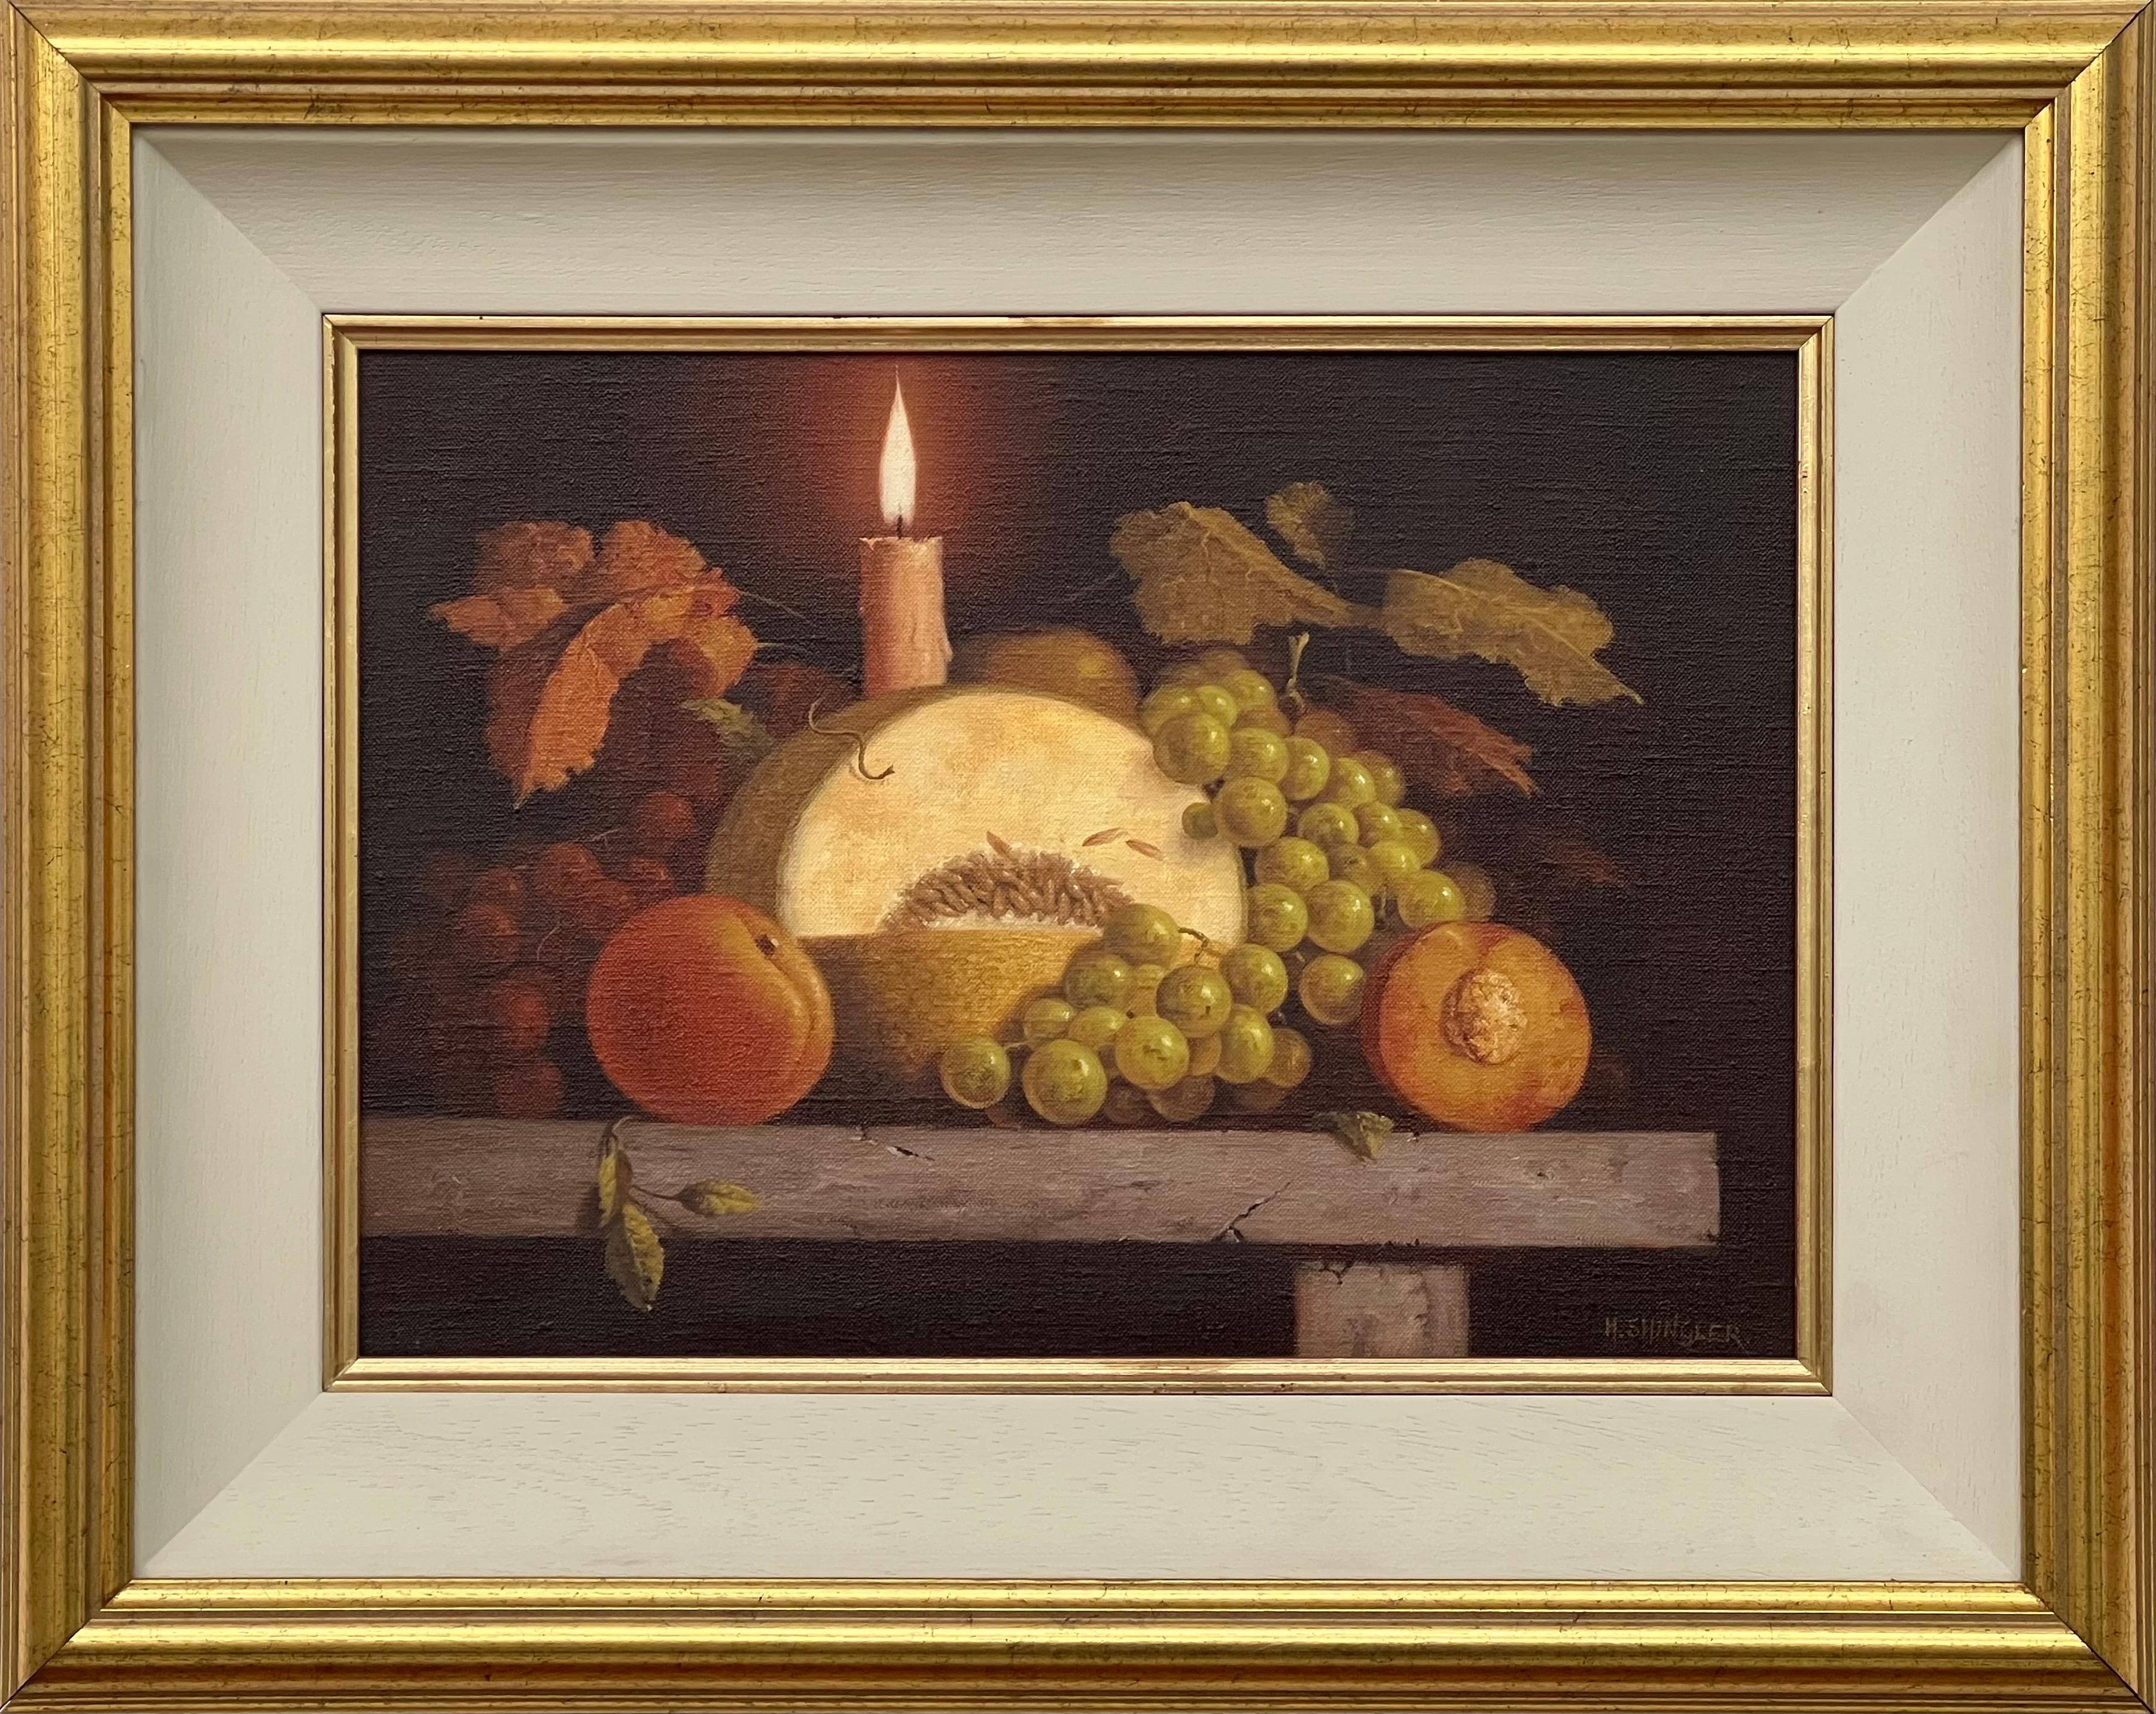 Traditional Interior Still Life Oil Painting of Fruit & Candle by British Artist